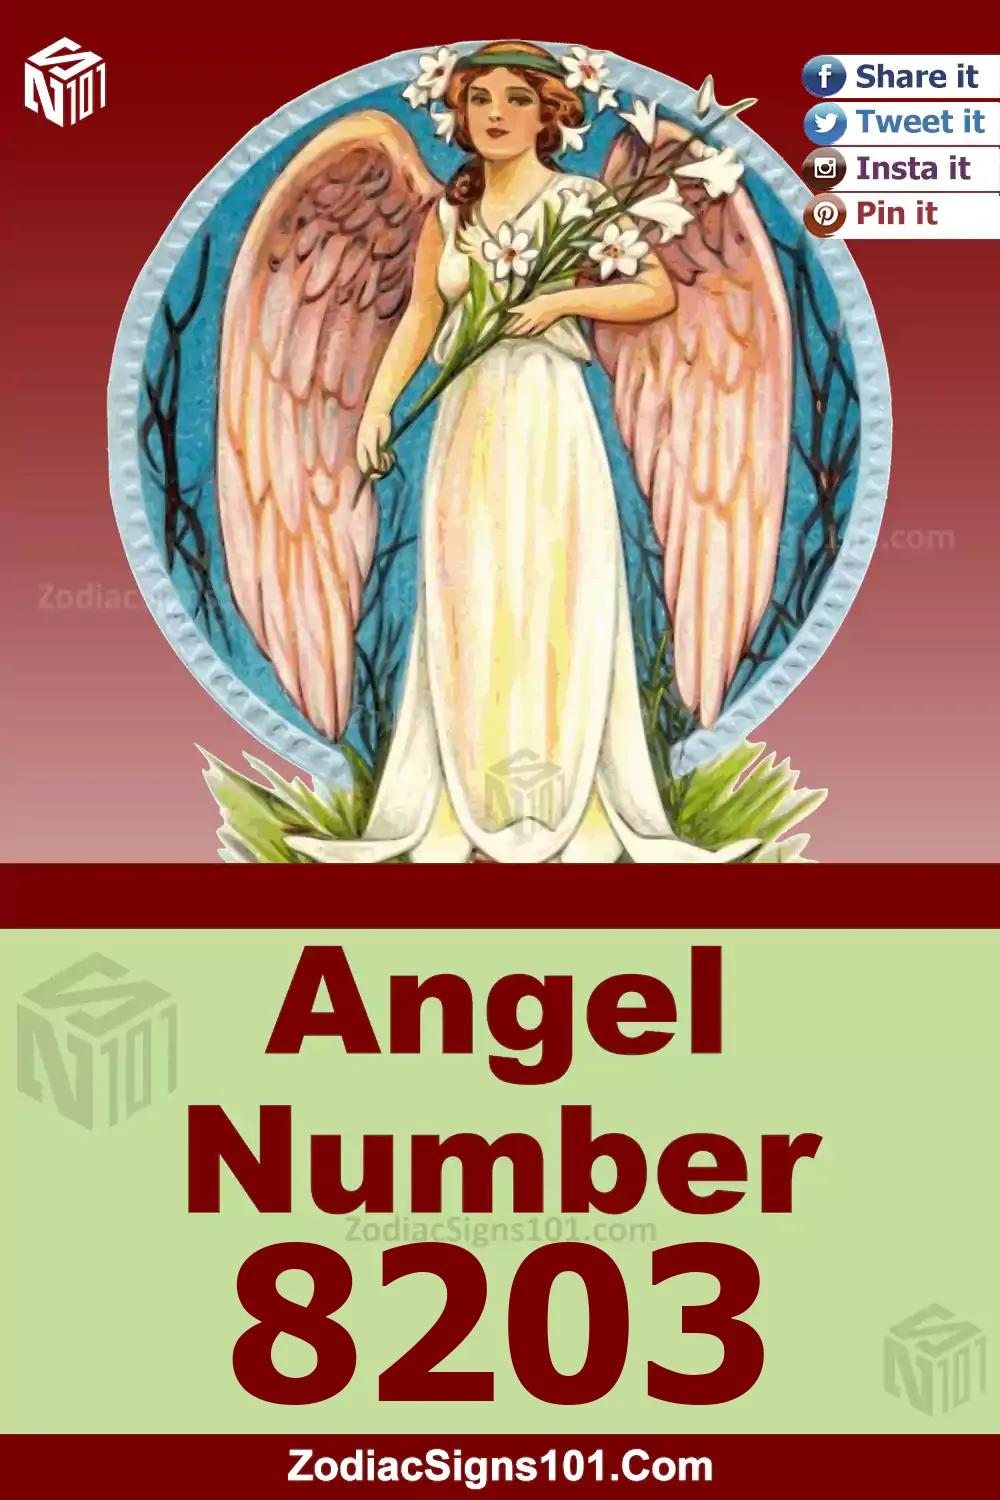 8203 Angel Number Meaning